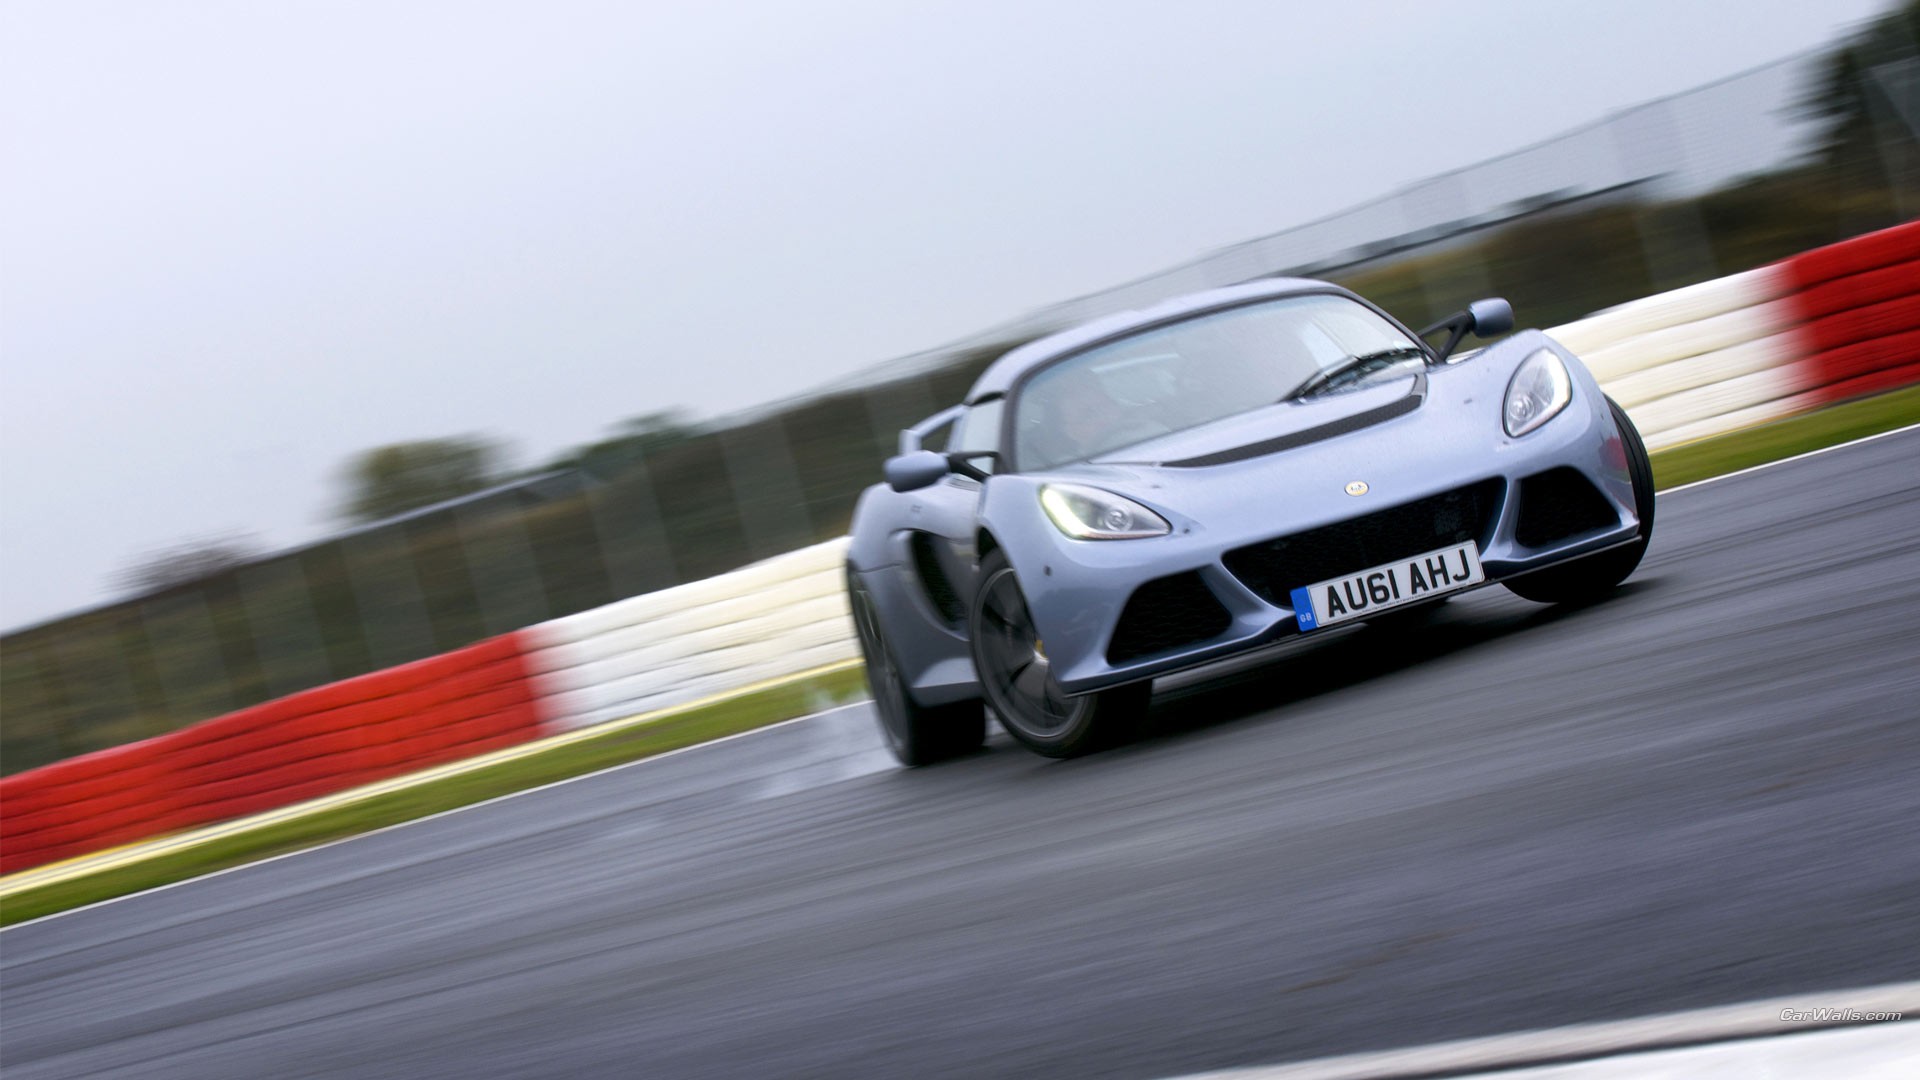 Free photo Lotus Exige racing on a sports track.